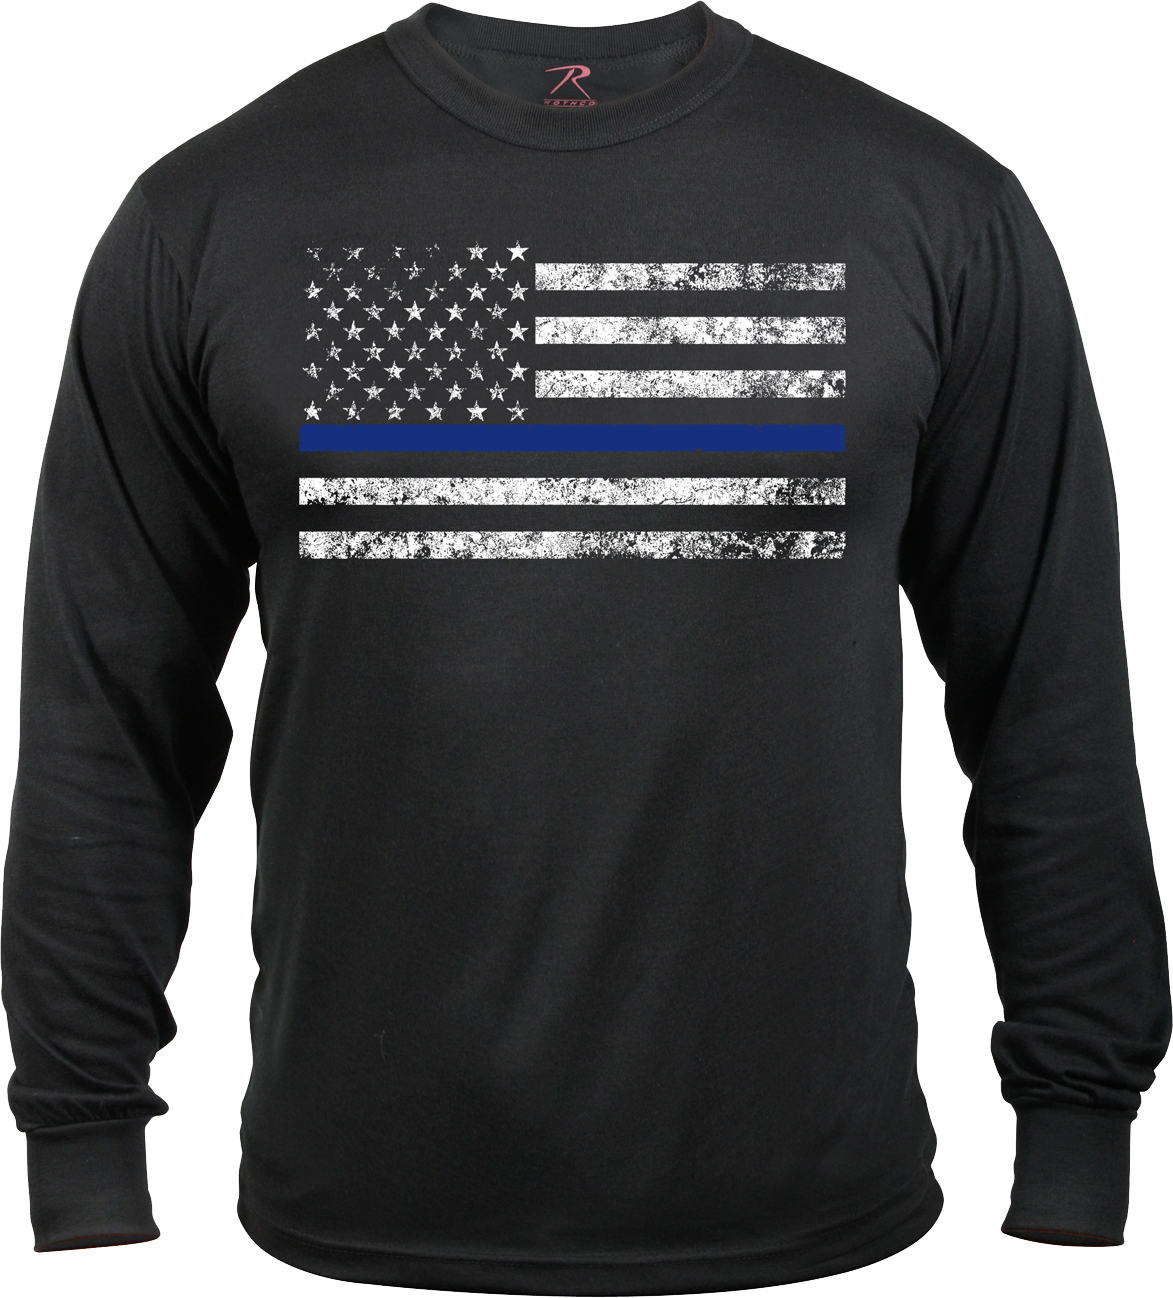 Rothco Black Thin Blue Line Support The Police US American Flag Long Sleeve T-Shirt